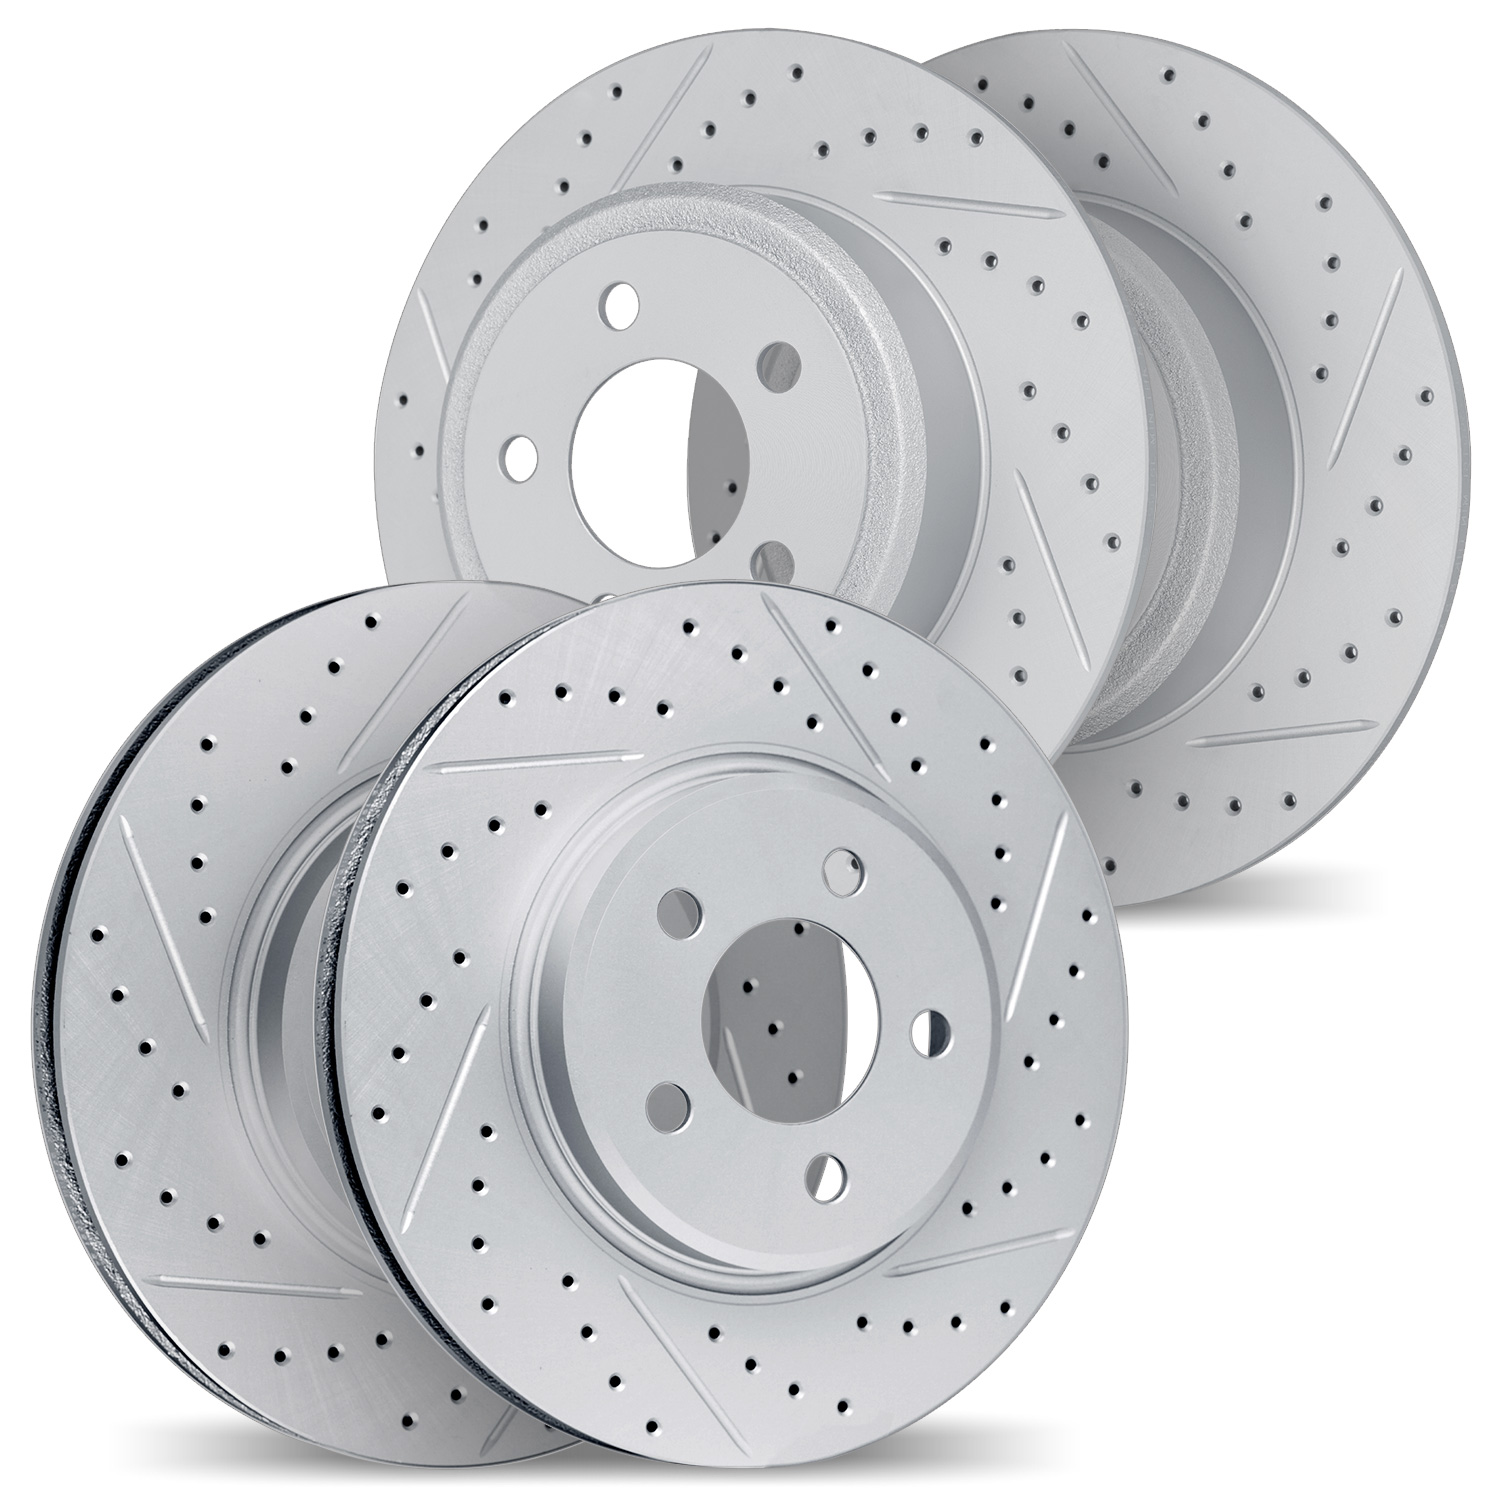 2004-47000 Geoperformance Drilled/Slotted Brake Rotors, 2004-2009 GM, Position: Front and Rear